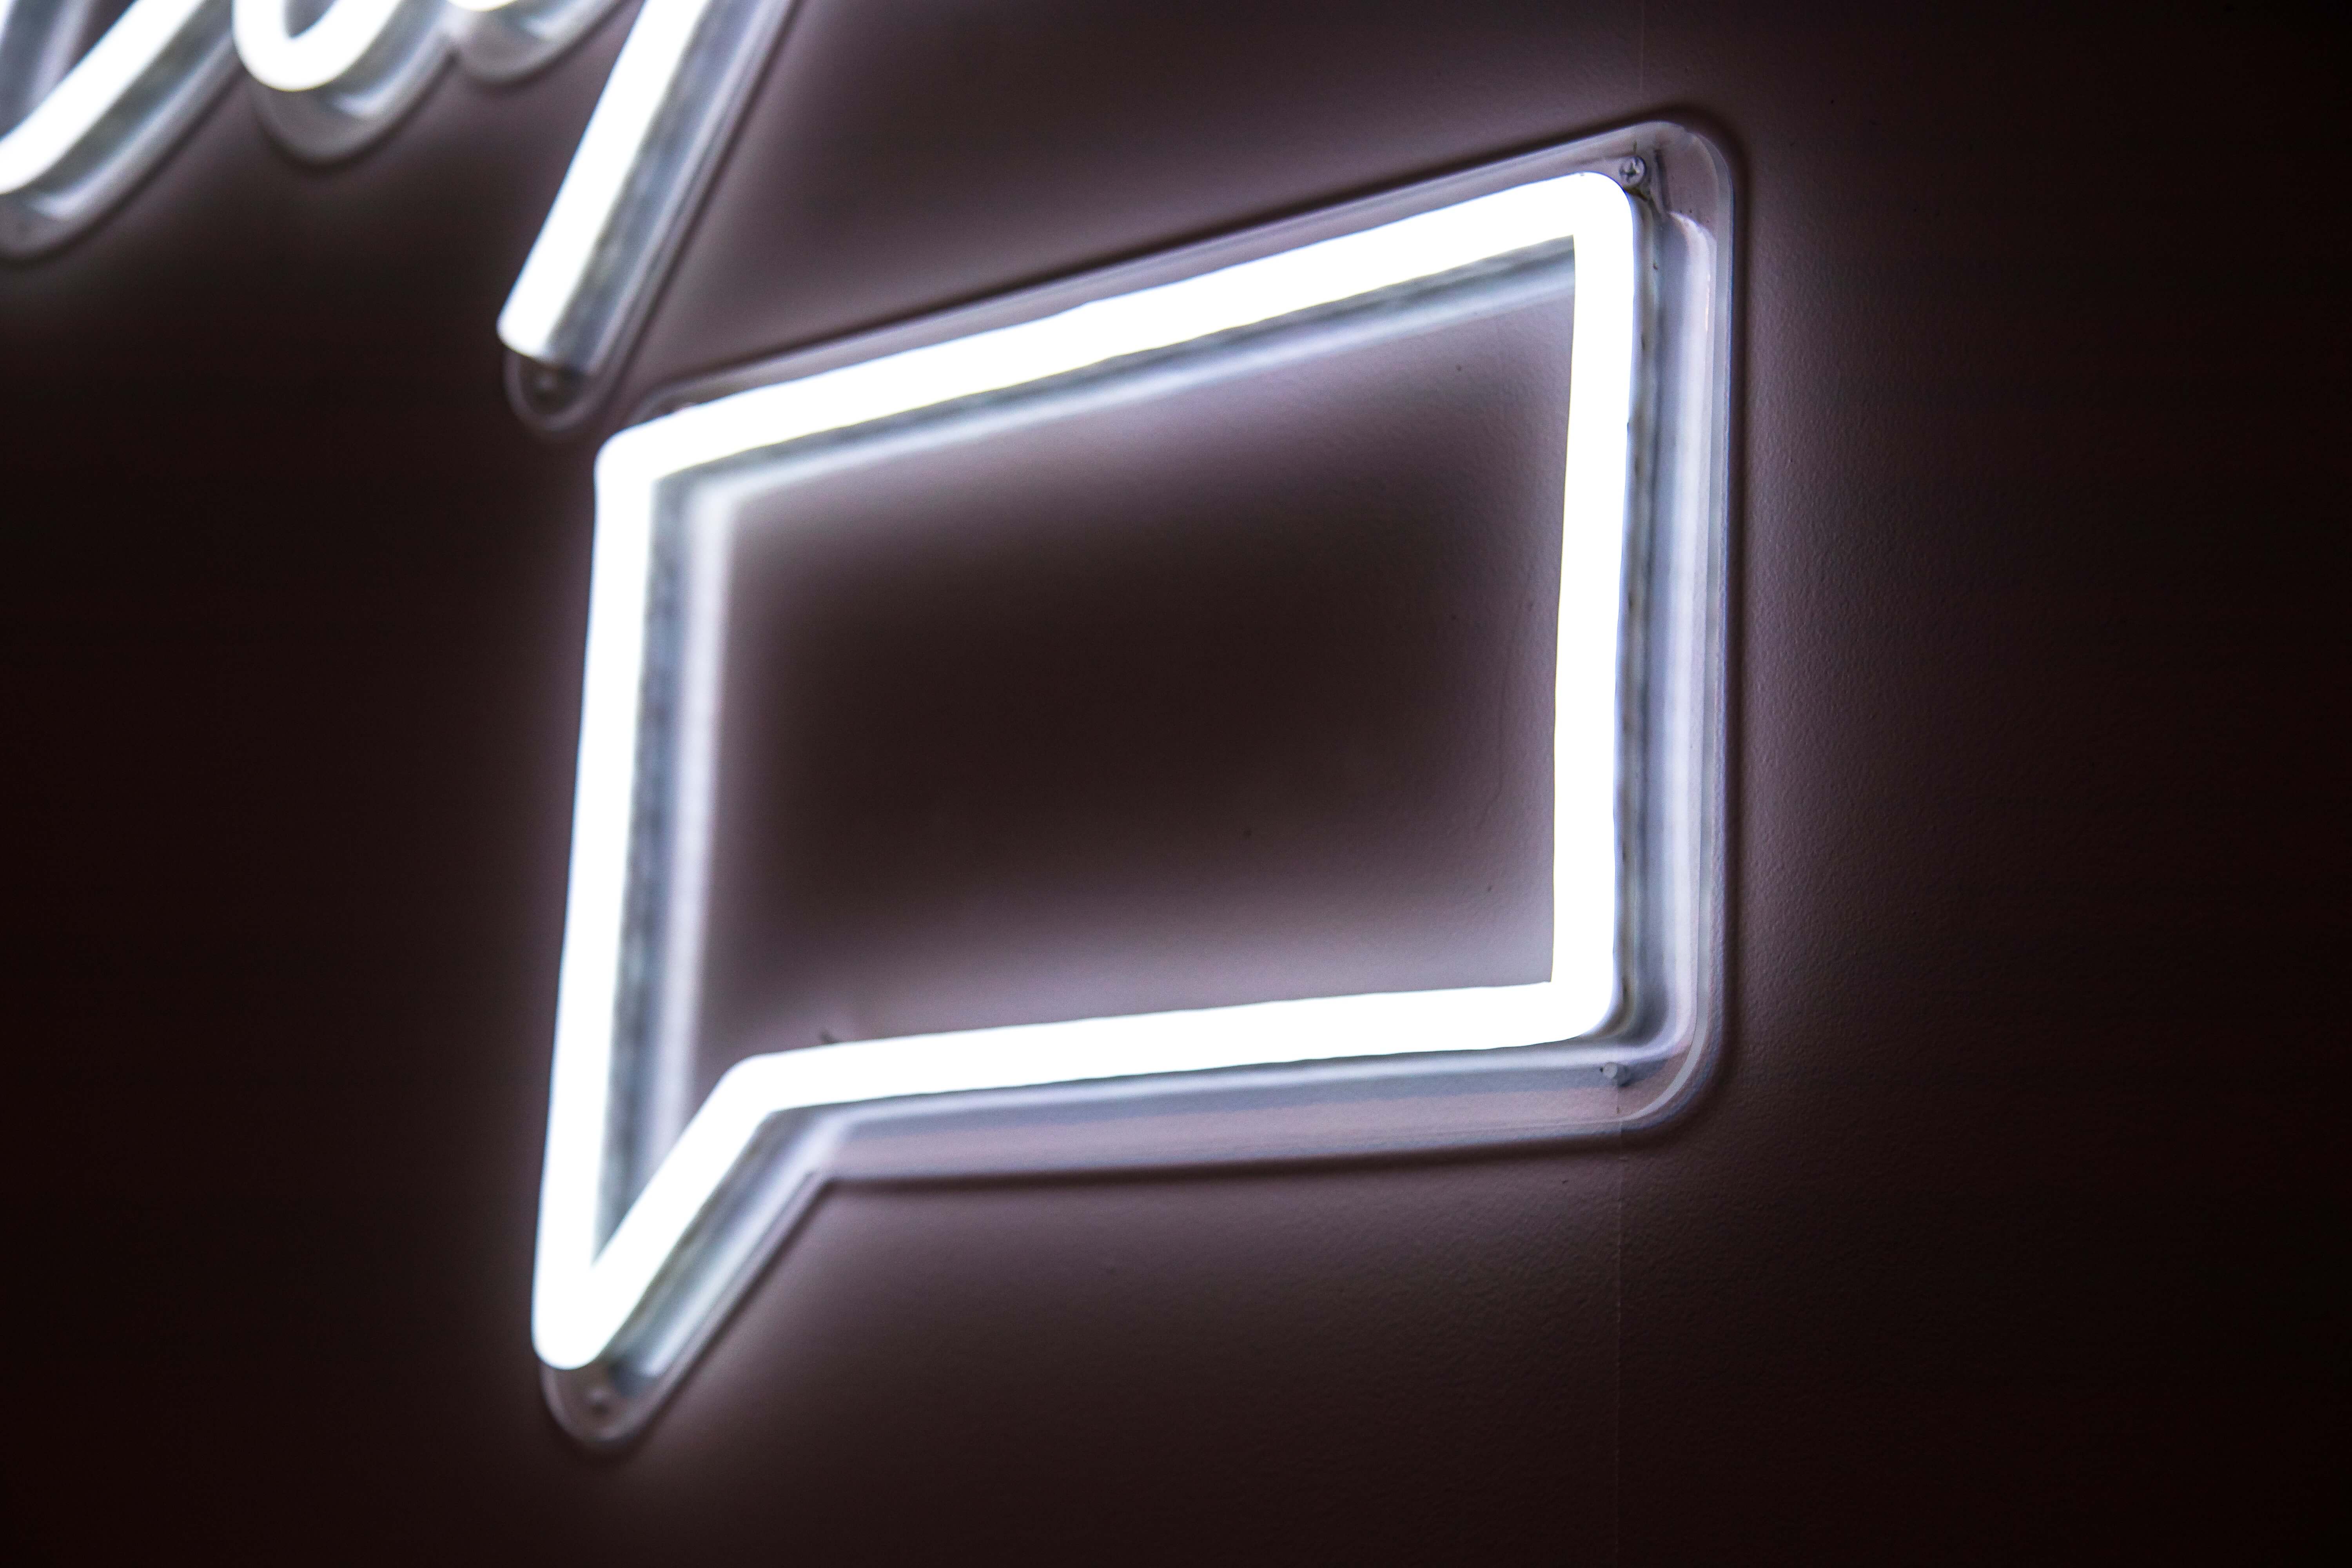 A neon sign shaped like a squared off speech bubble